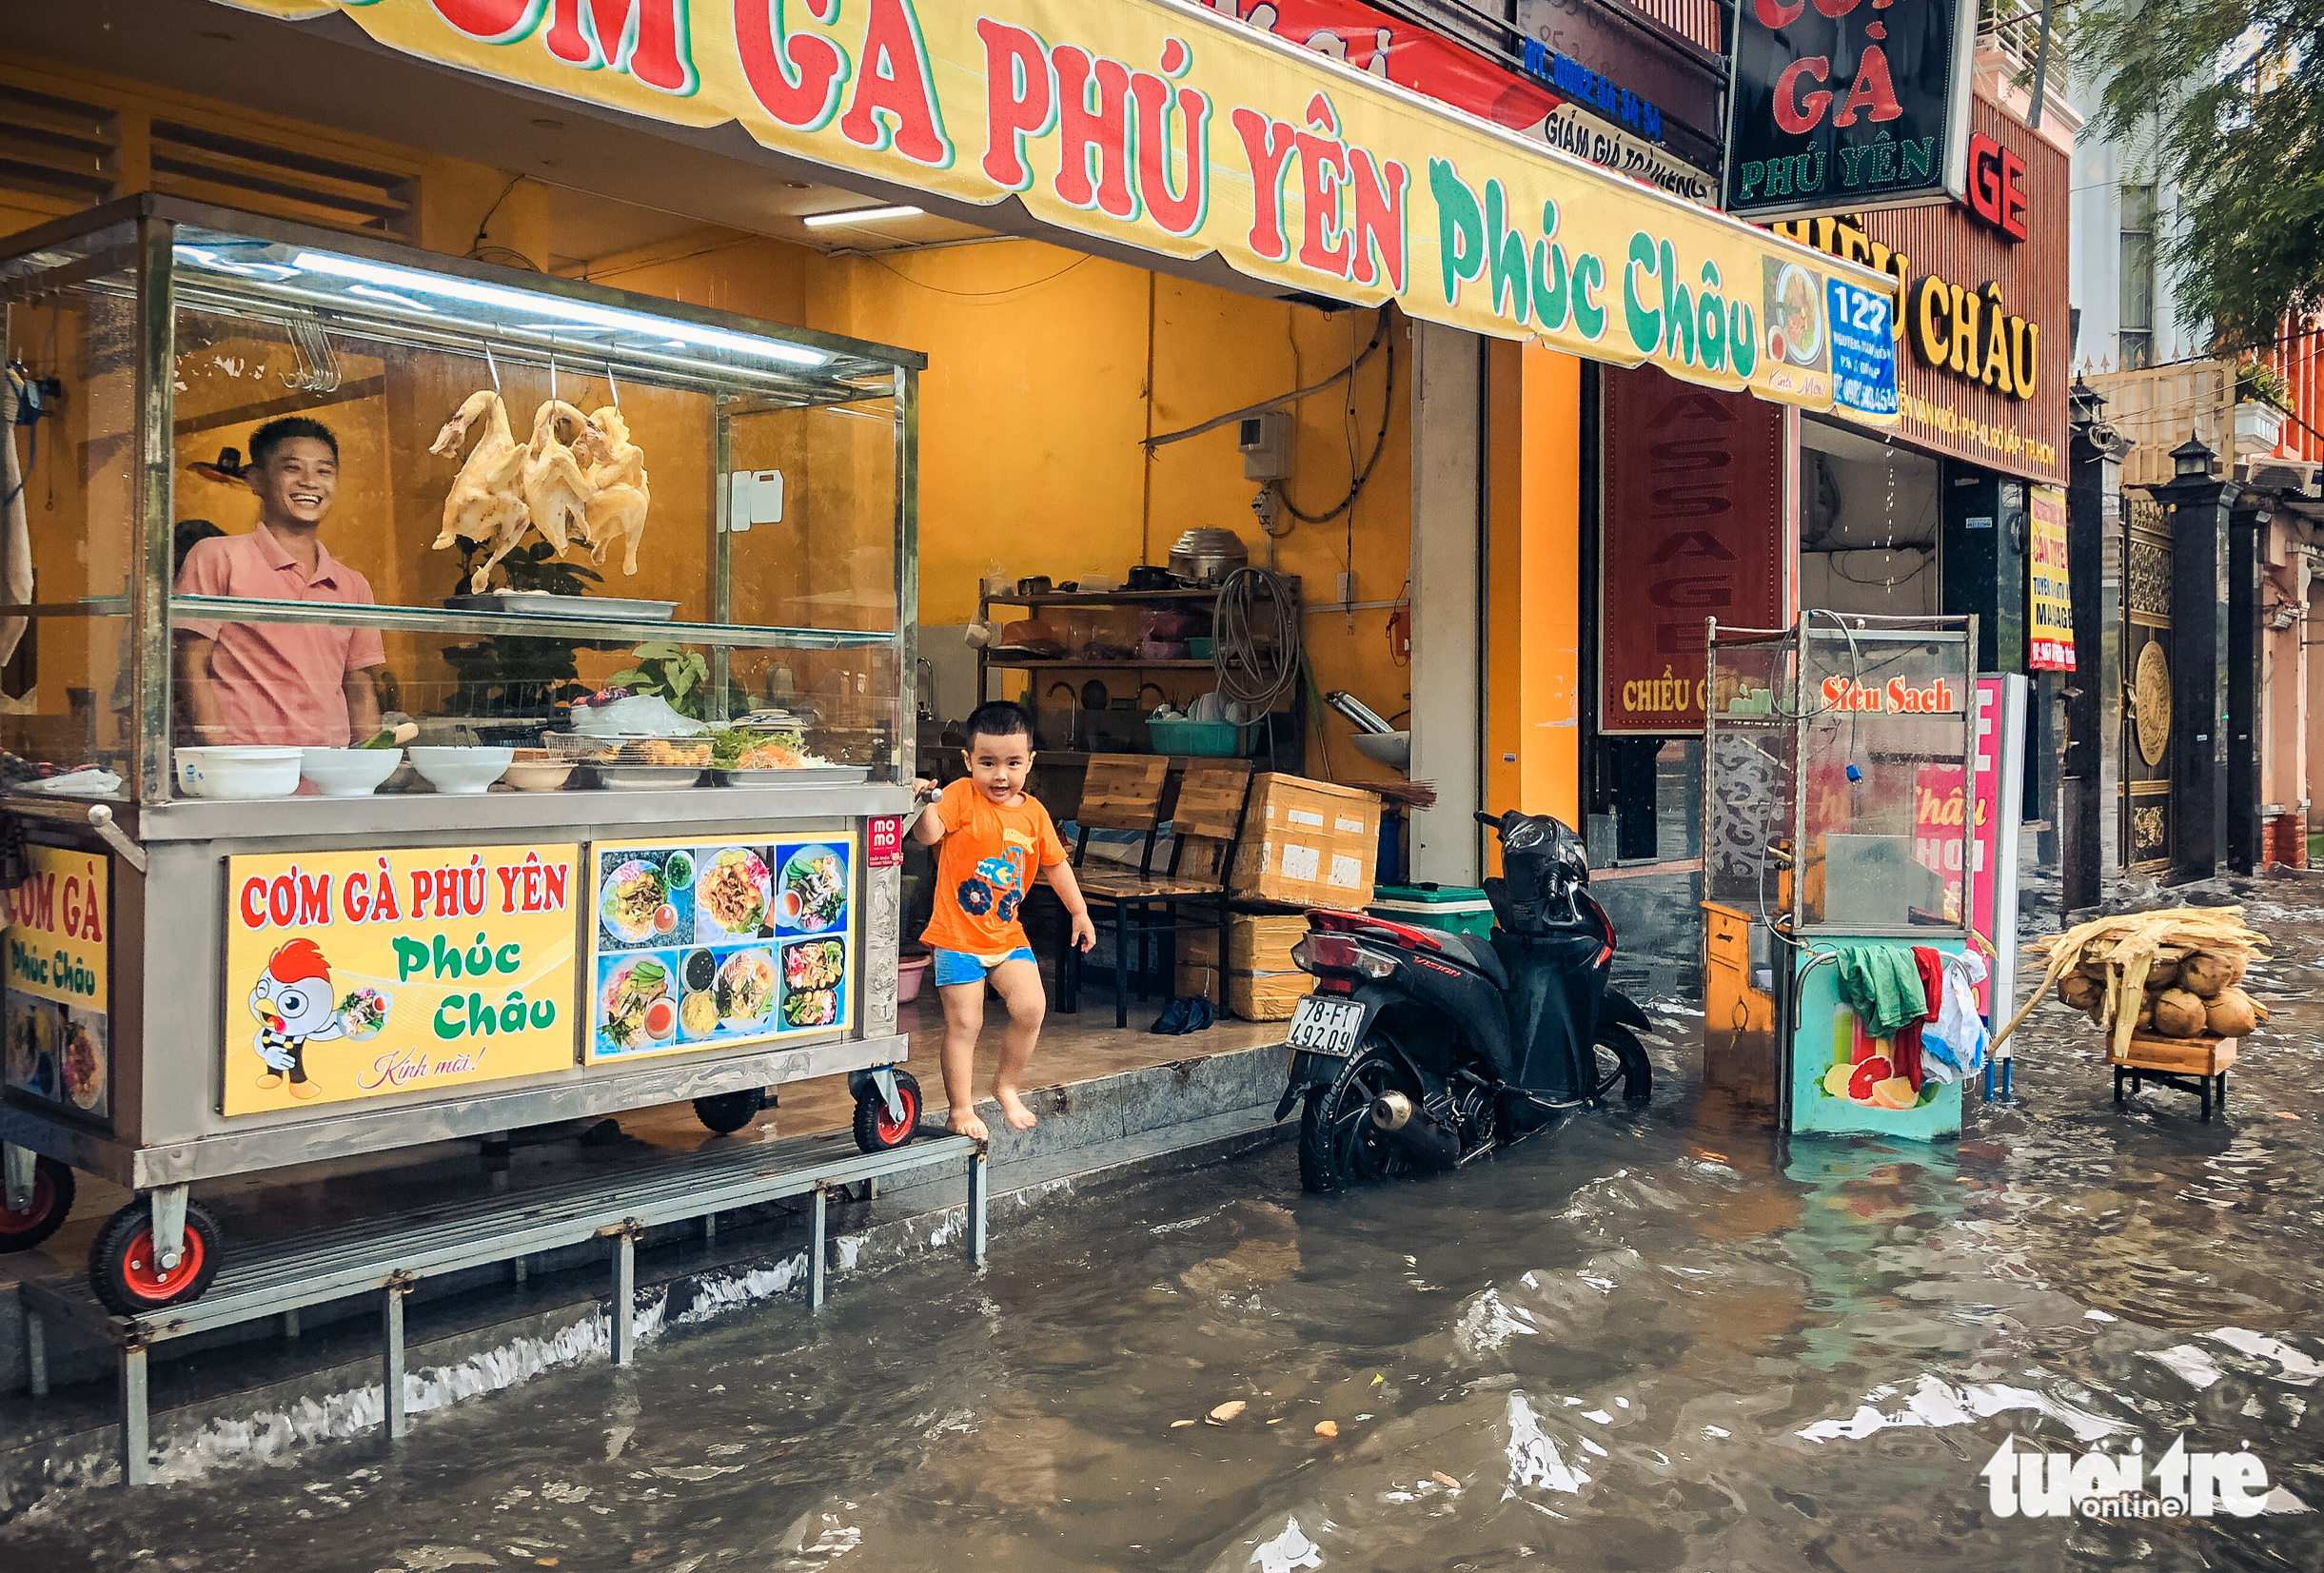 The sidewalk in front of a diner is submerged by rainwater in Ho Chi Minh City, July 20, 2022. Photo: Chau Tuan / Tuoi Tre